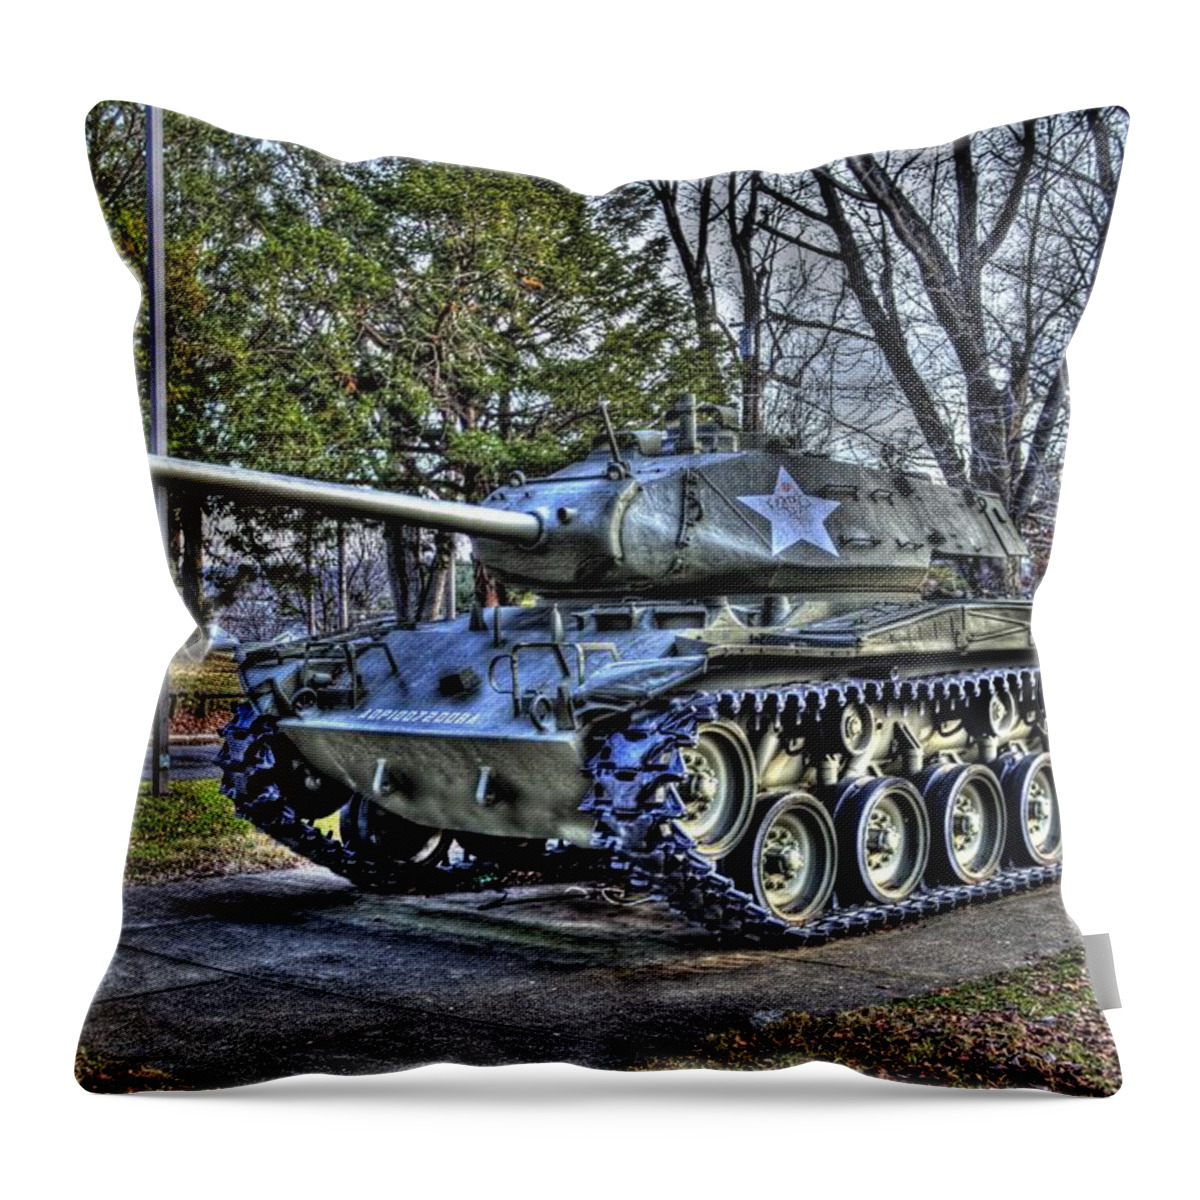 Movid Throw Pillow featuring the photograph Parkersburg Tank by Jonny D